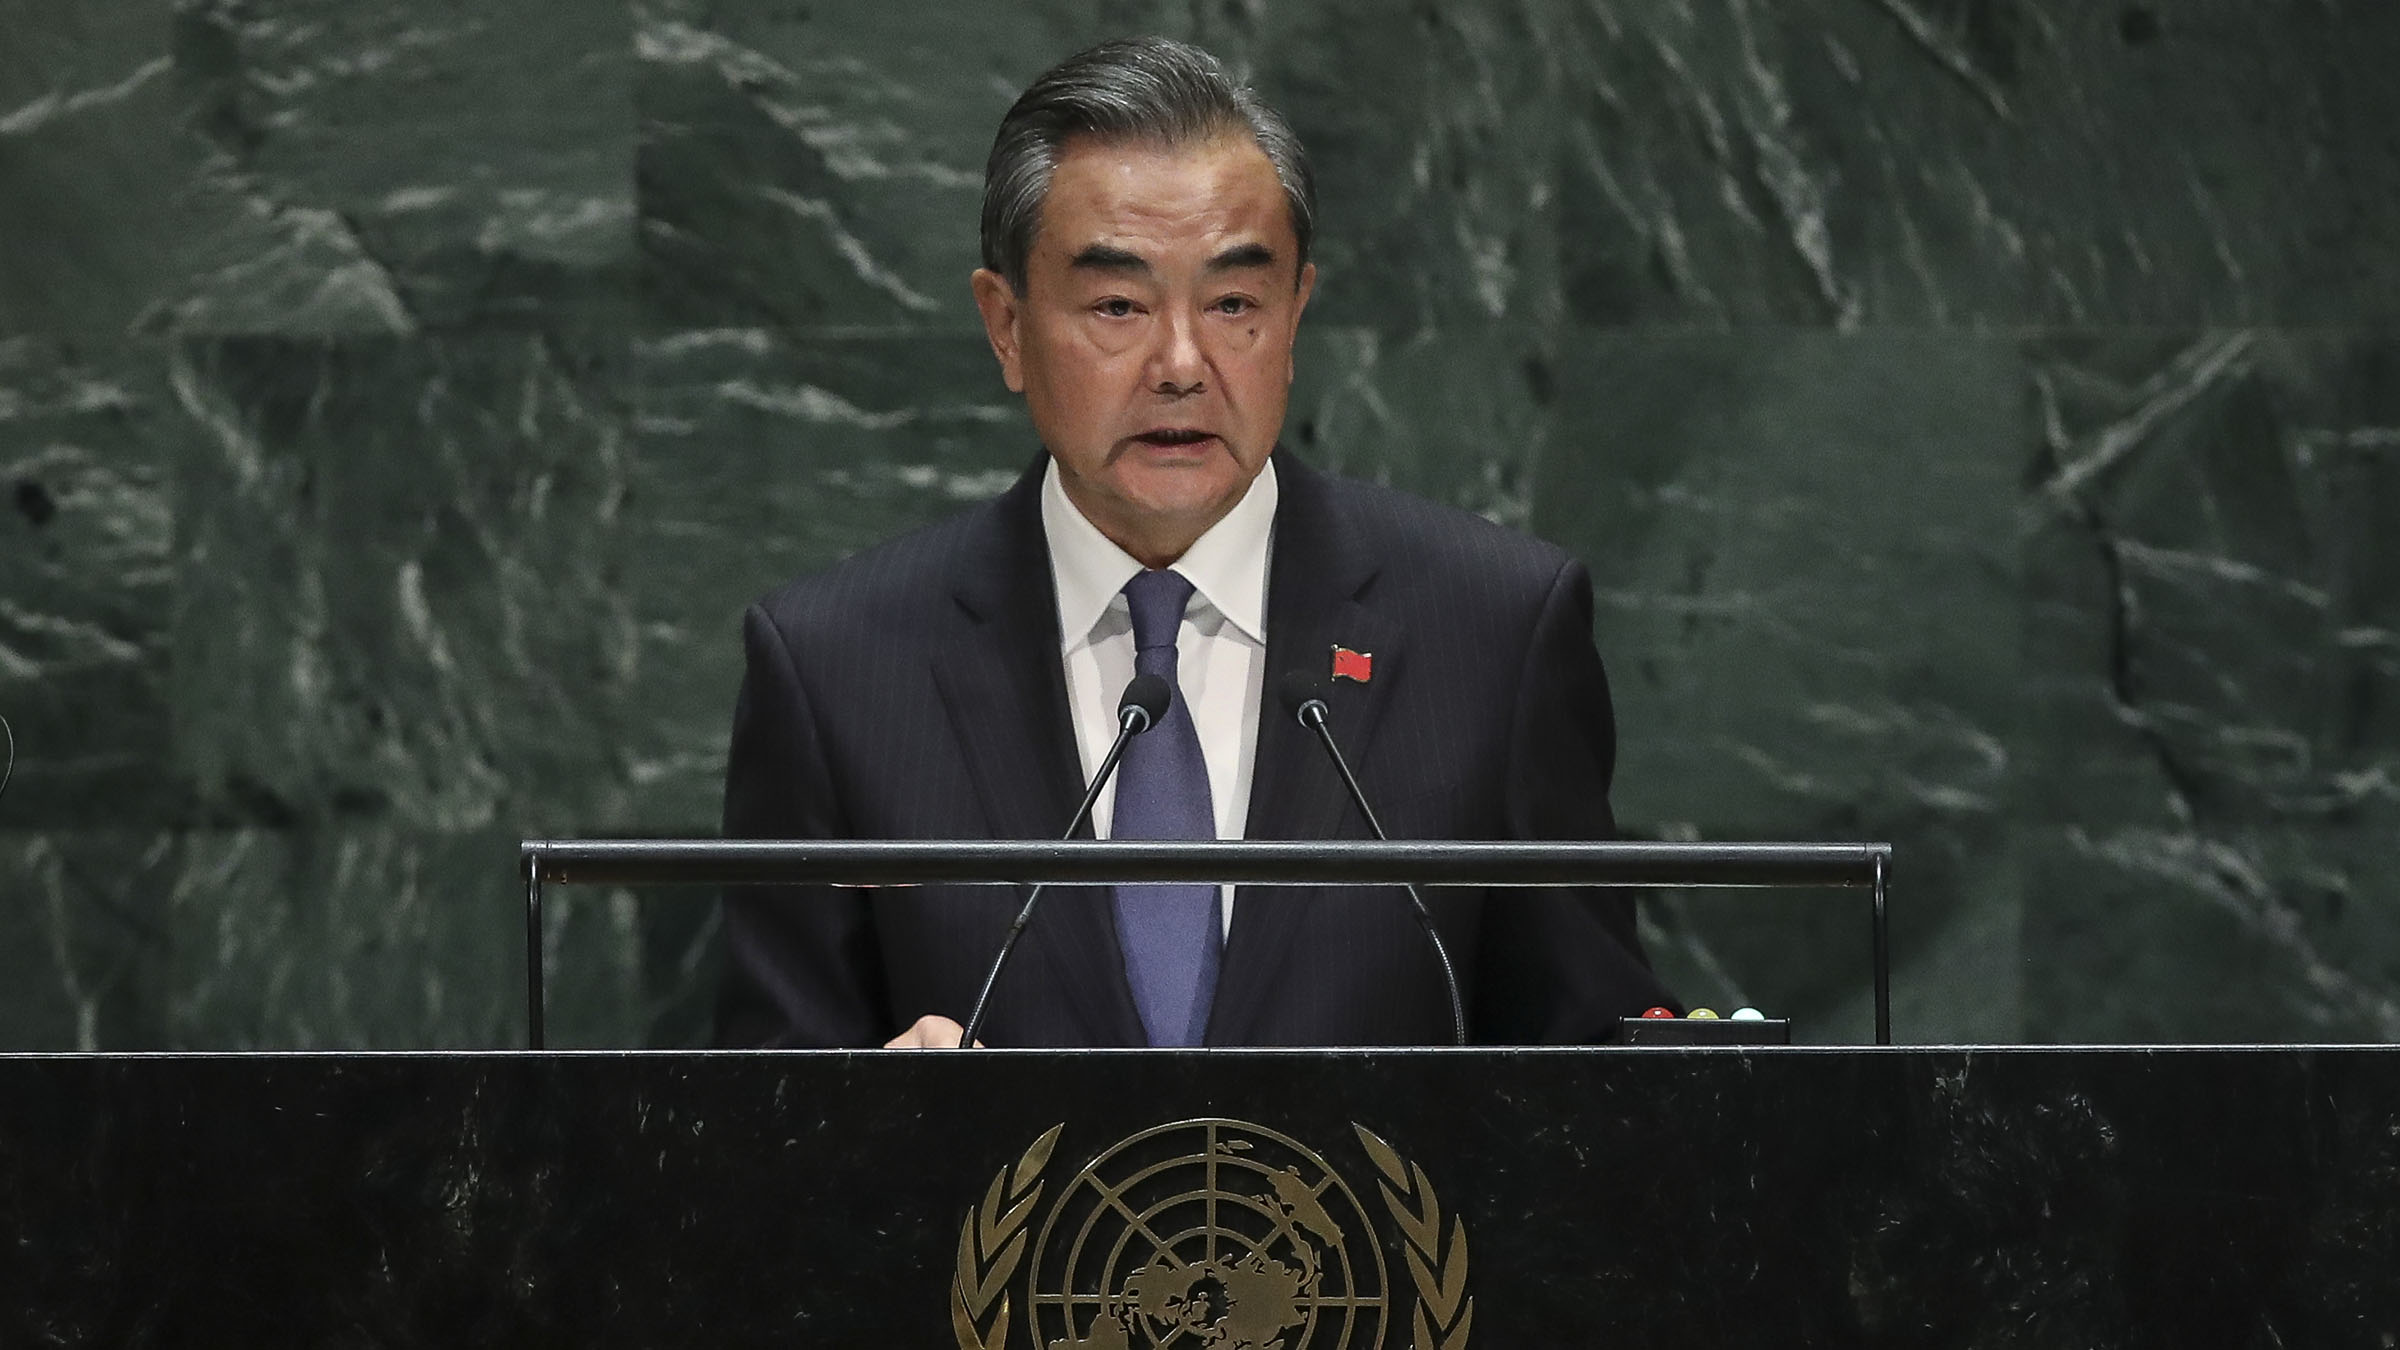 VIDEO: Wang Yi addresses the 74th UN General Assembly